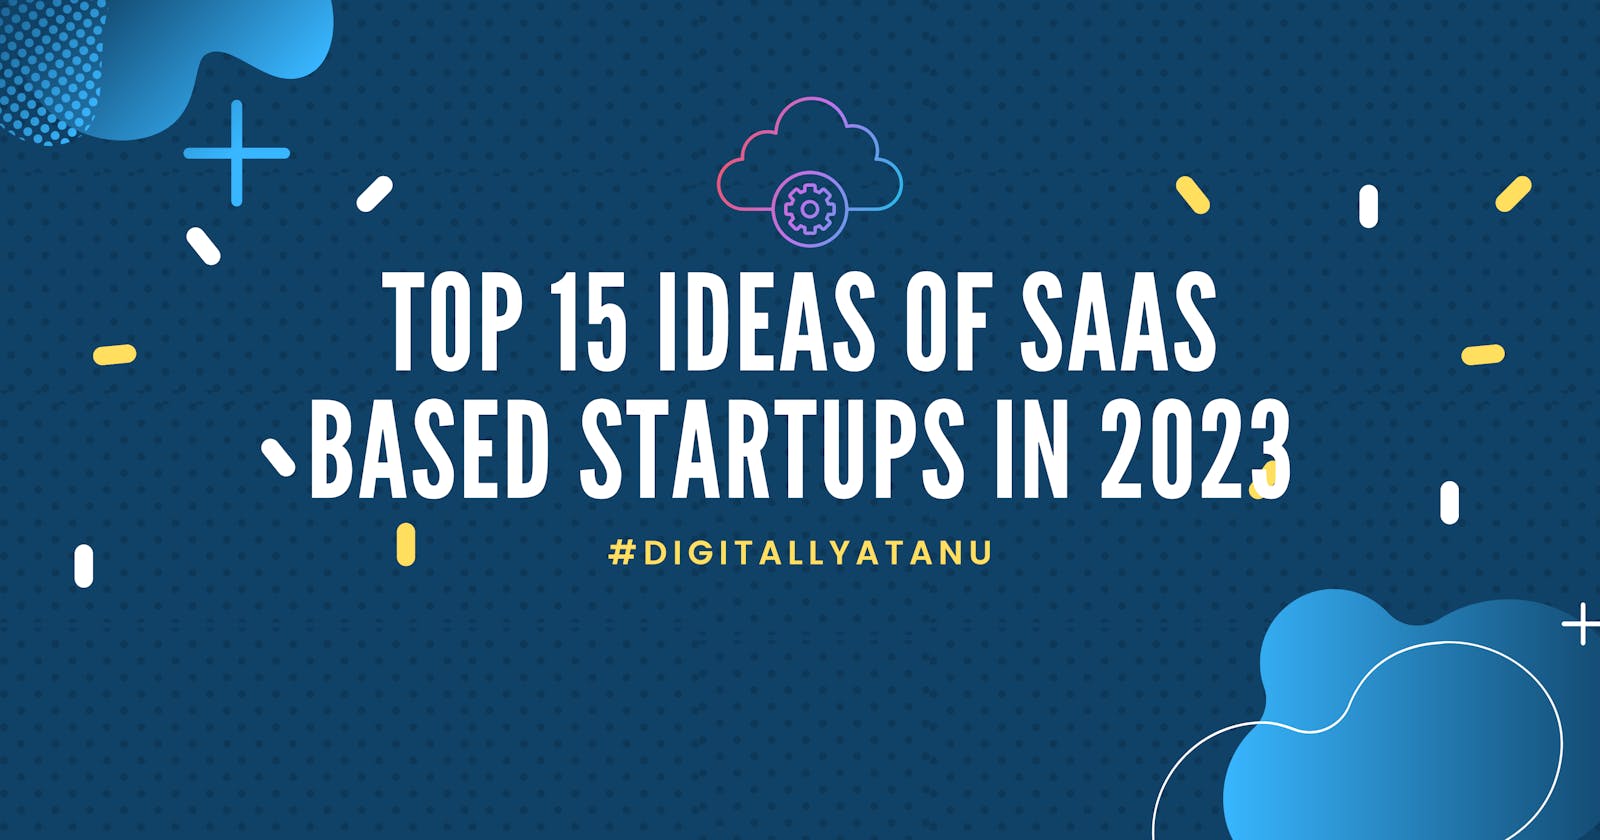 Top 15 ideas of SaaS-based startups in 2023 [by ChatGPT]